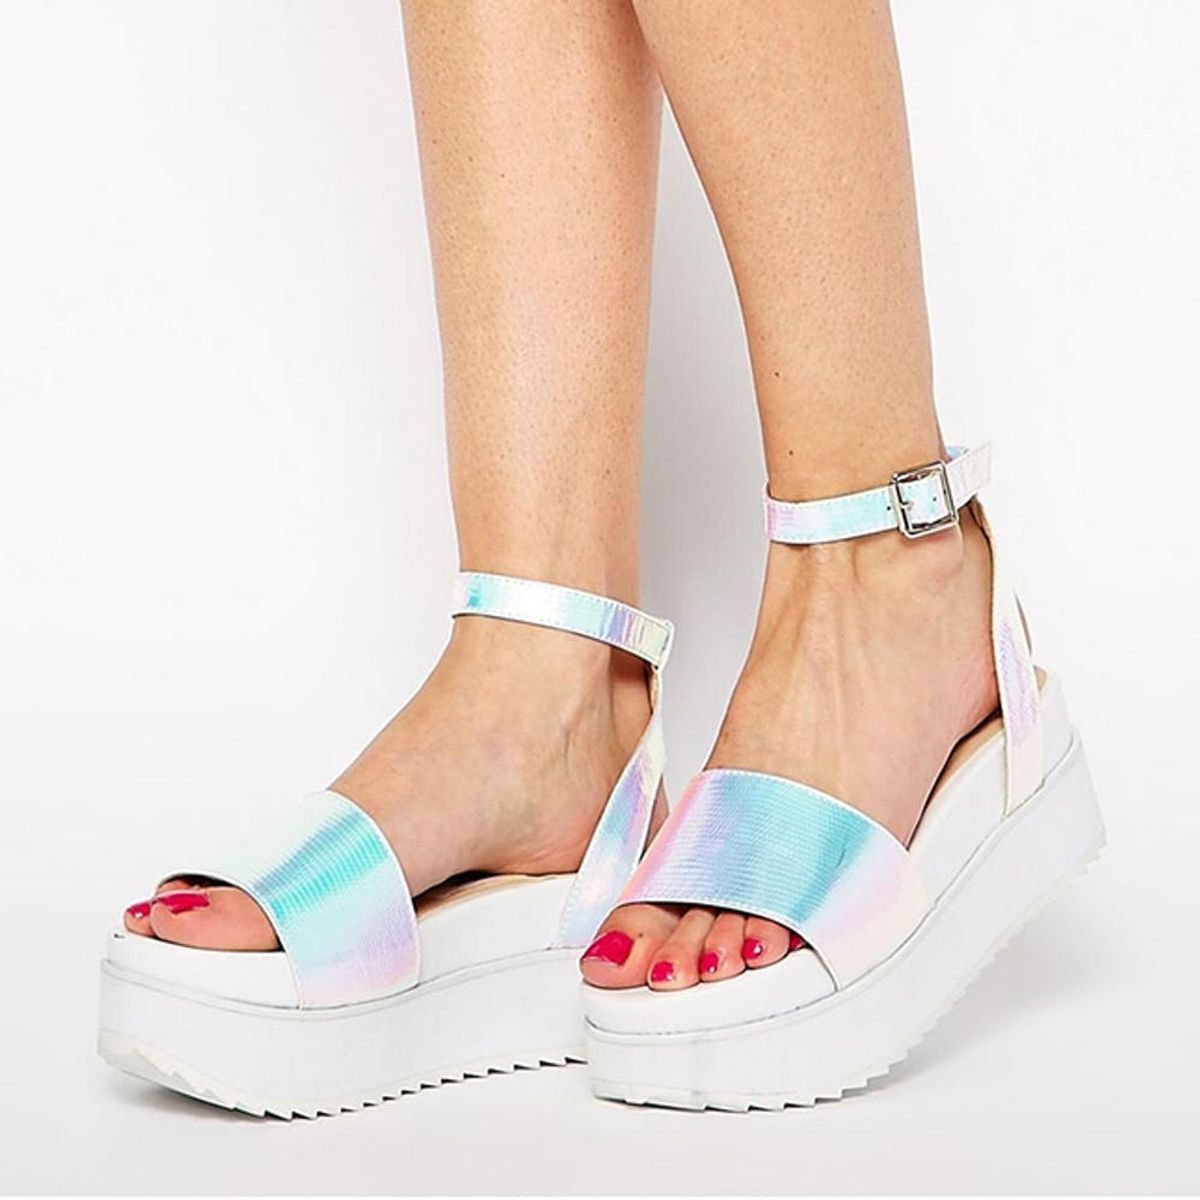 20 Ways to Rock Summer’s Hottest Sandal Trends